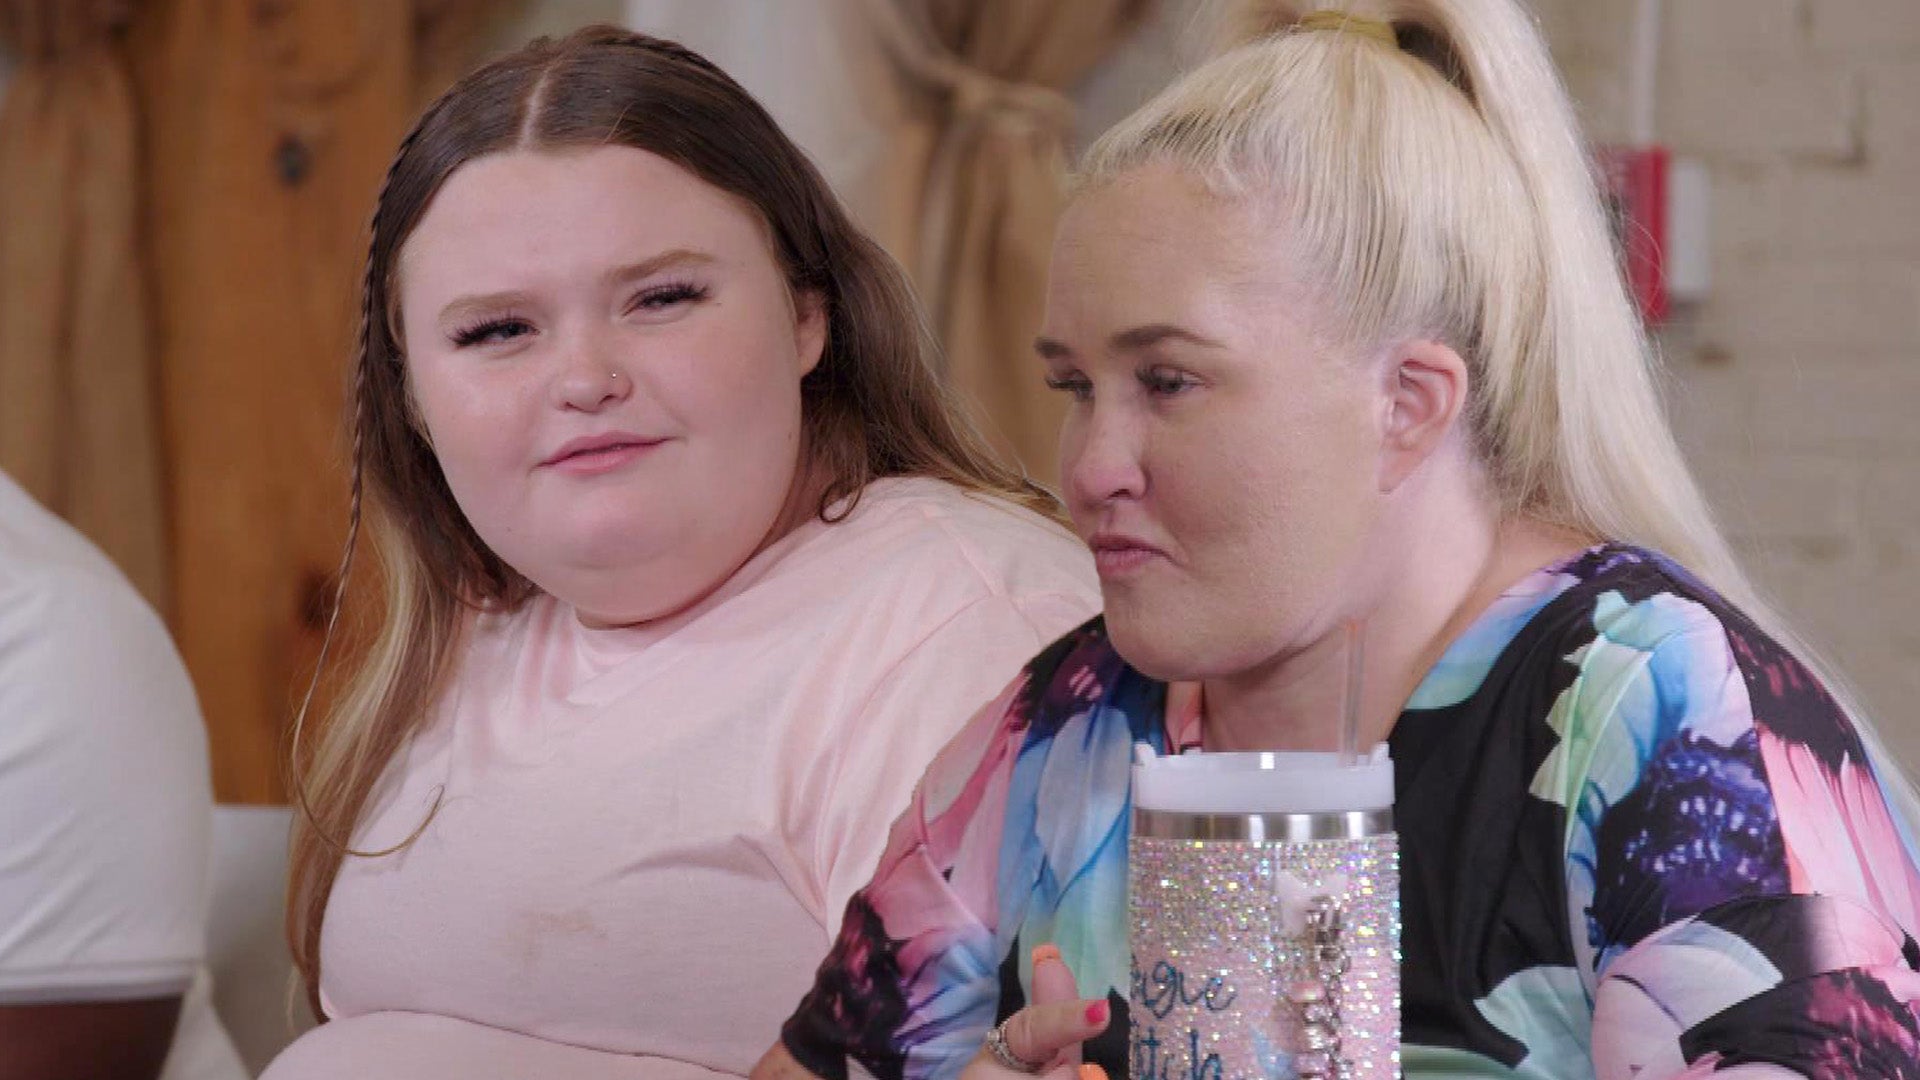 Alana ‘Honey Boo Boo’ Thompson Tells Mama June Not to Visit Her at College (Exclusive)